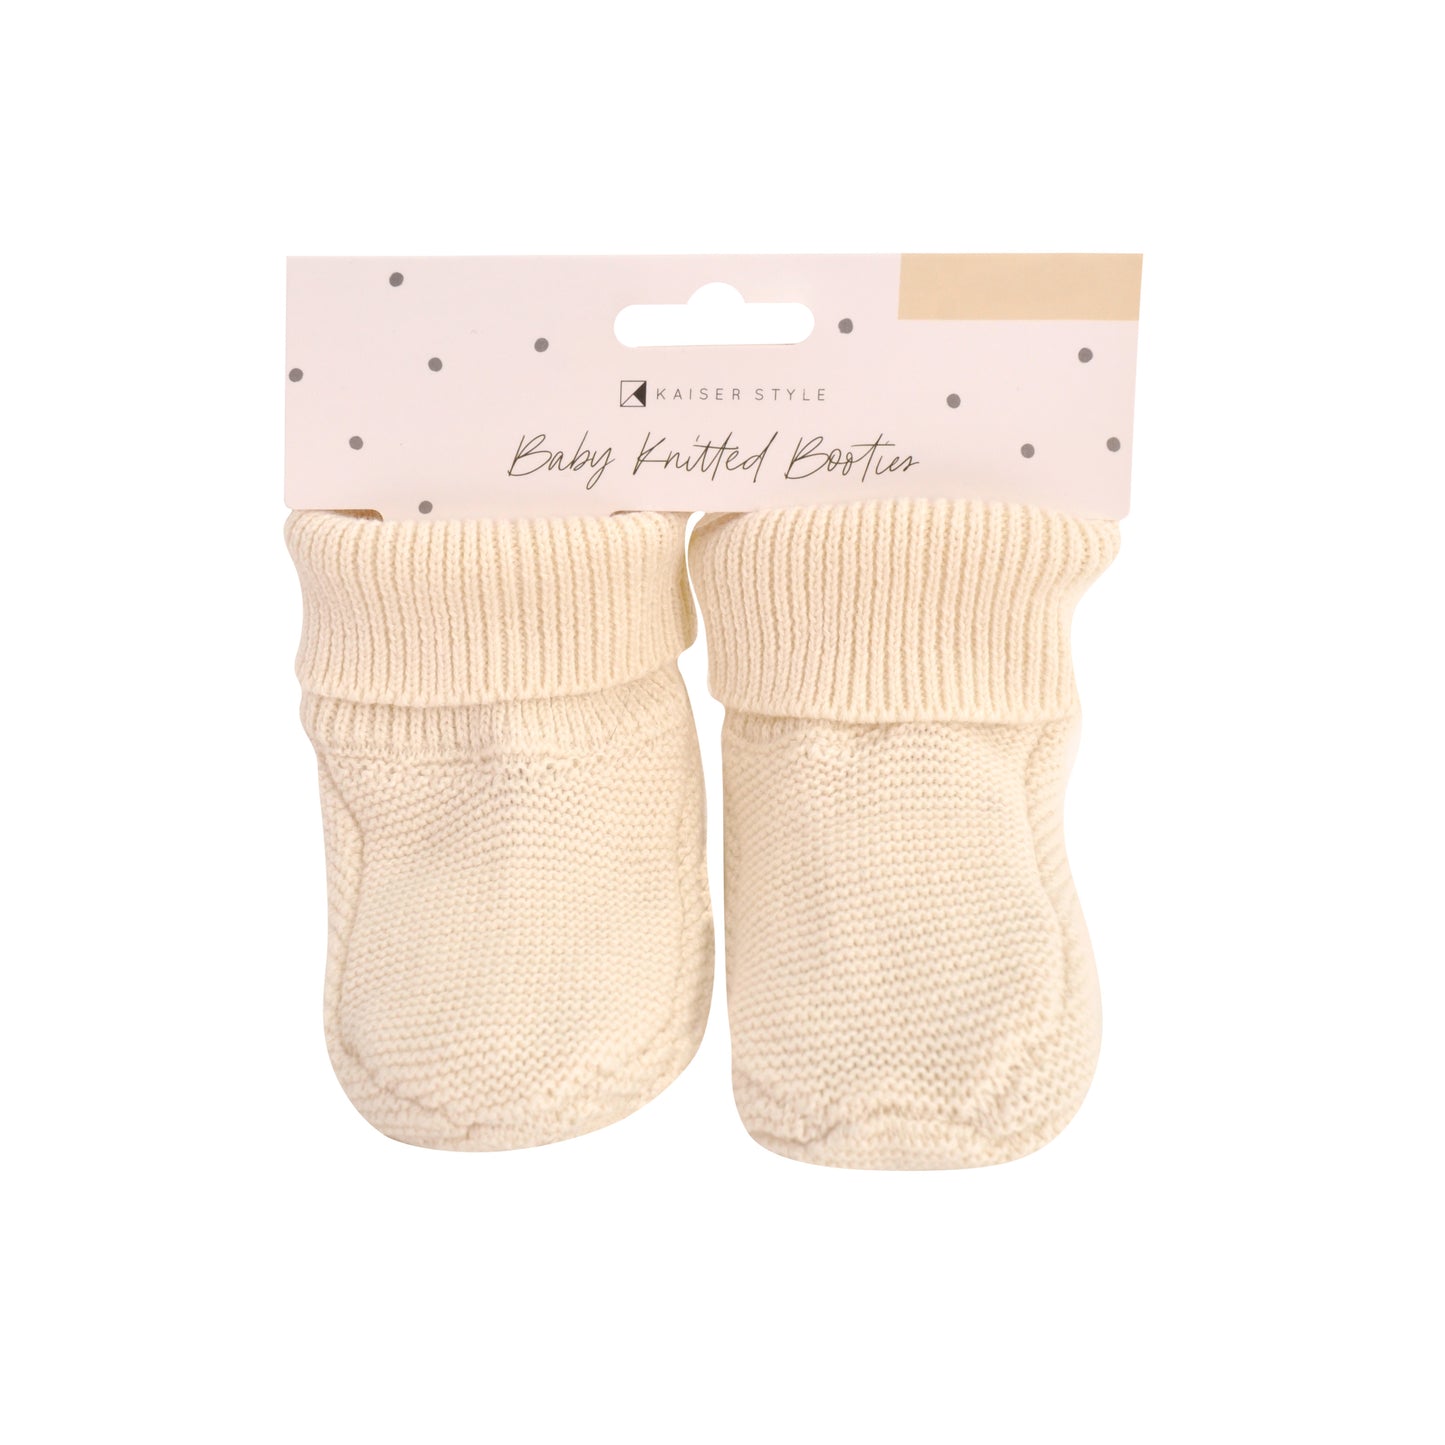 Baby Knitted Booties 6-12 Months - Cream